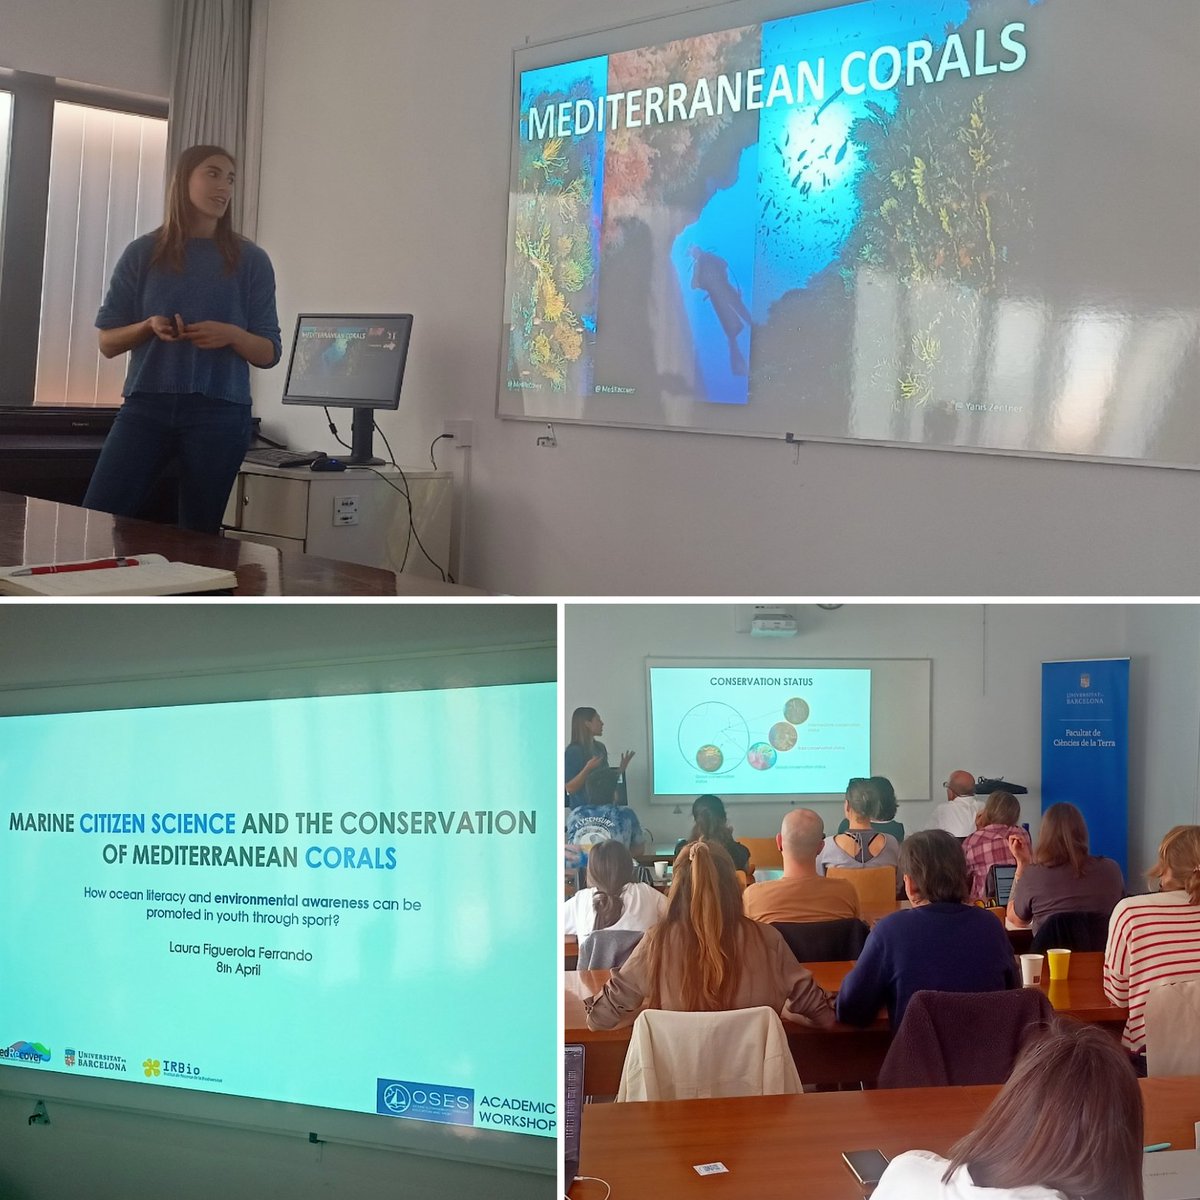 🌊 The OSES workshop continues with a presentation on marine citizen science and the conservation of mediterranean corals by Laura Figuerola from @UniBarcelona. @FiguerolaLaura @Med_Recover #biodiversity